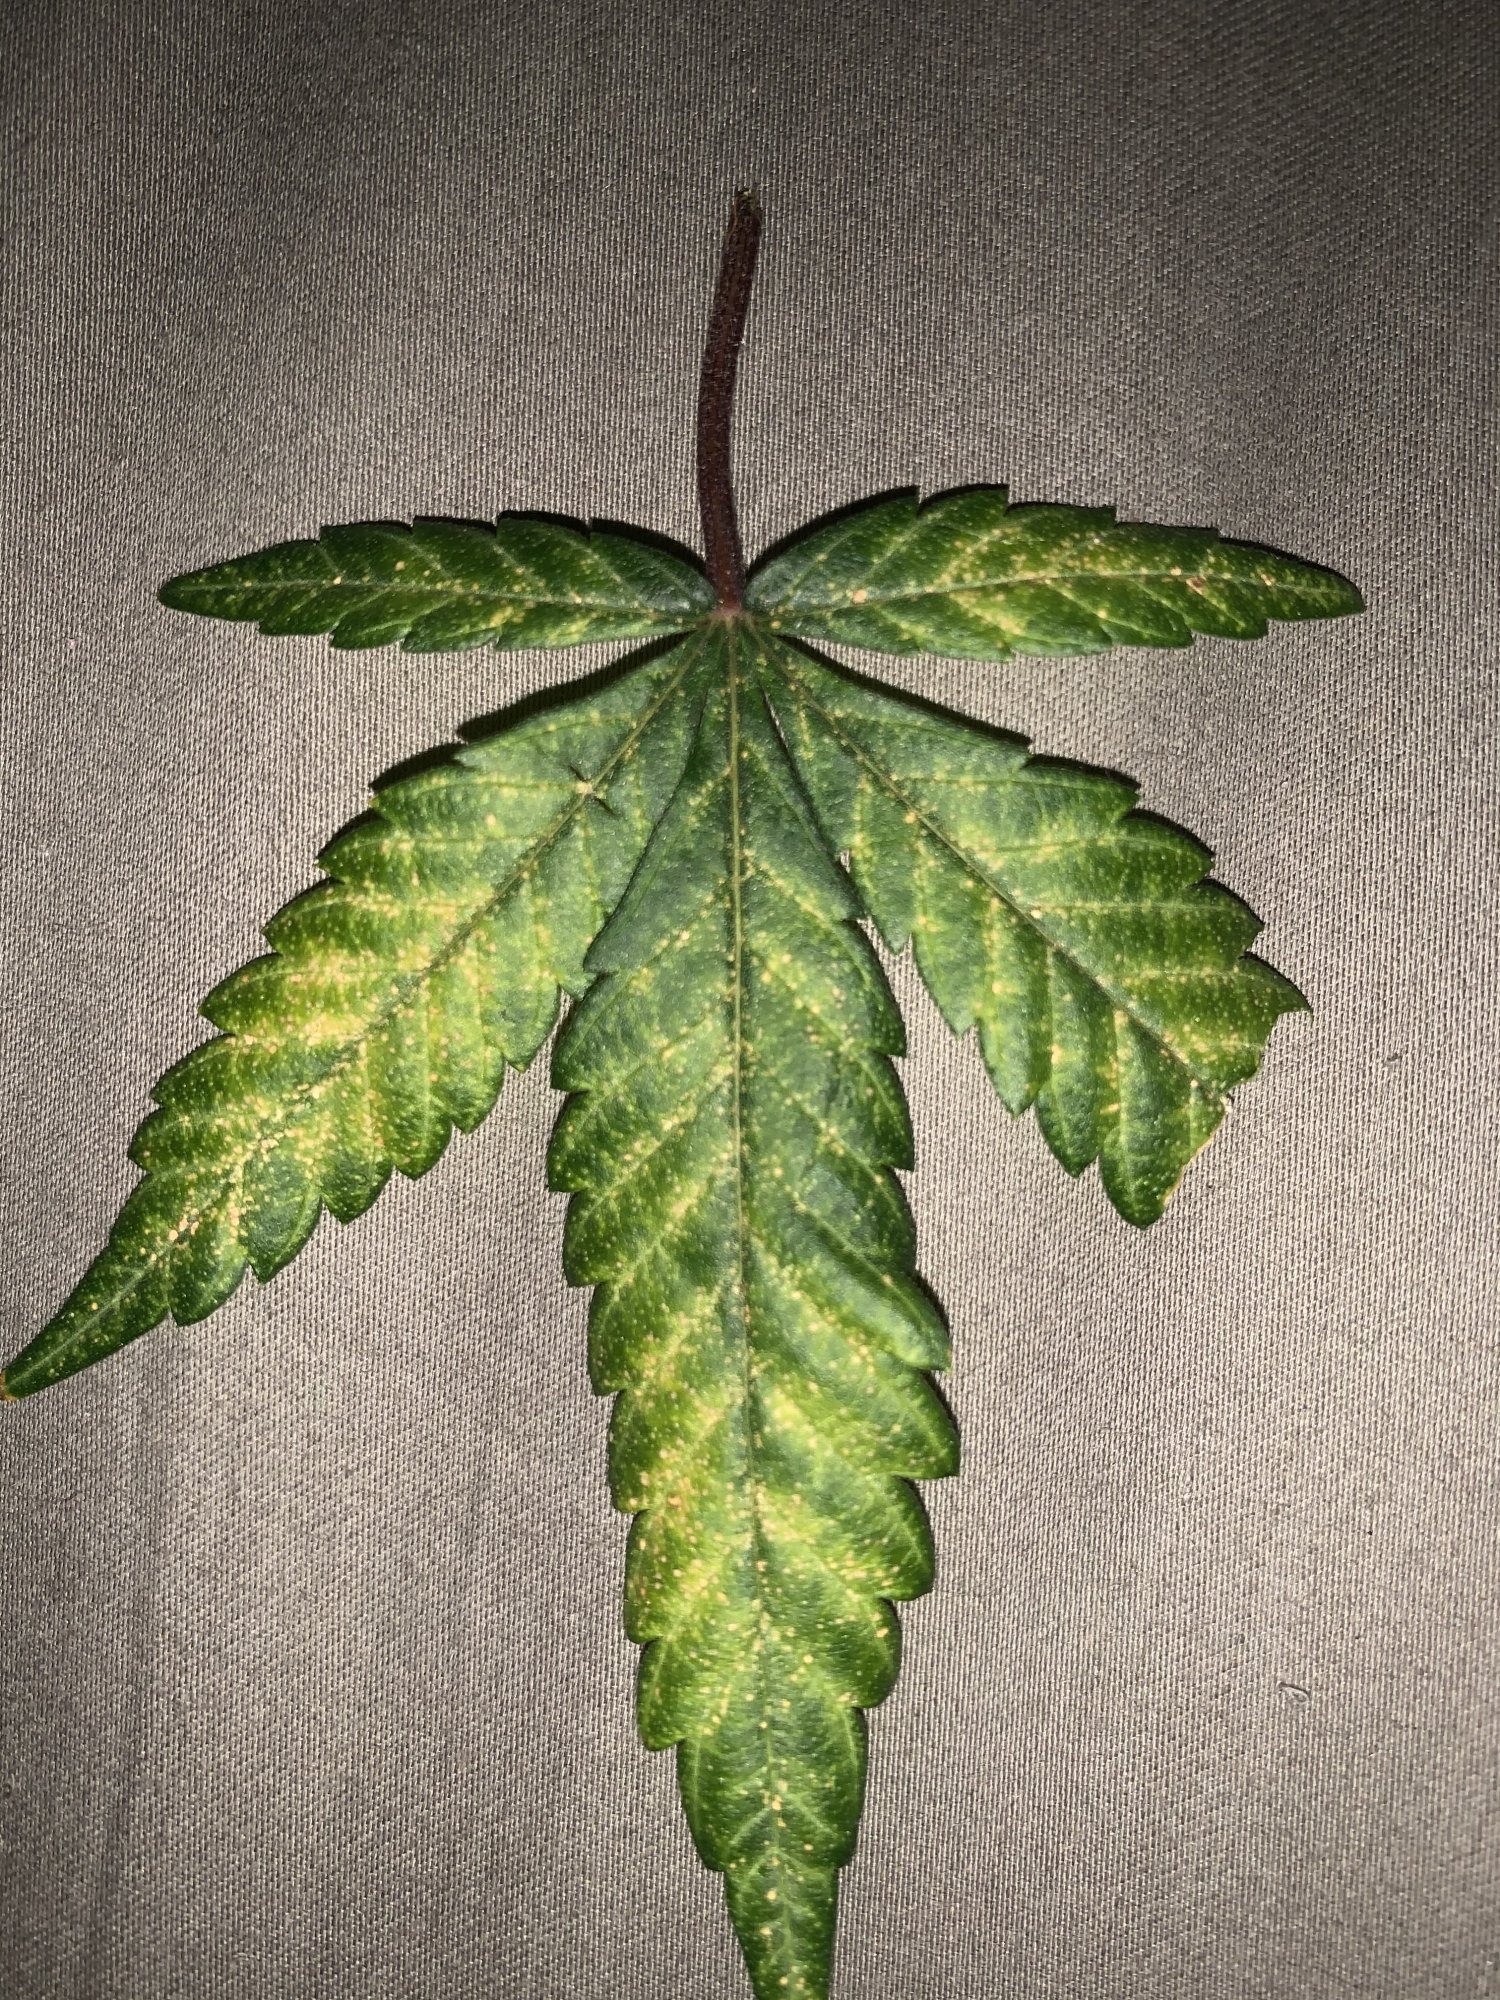 First time grower leaf problems 2